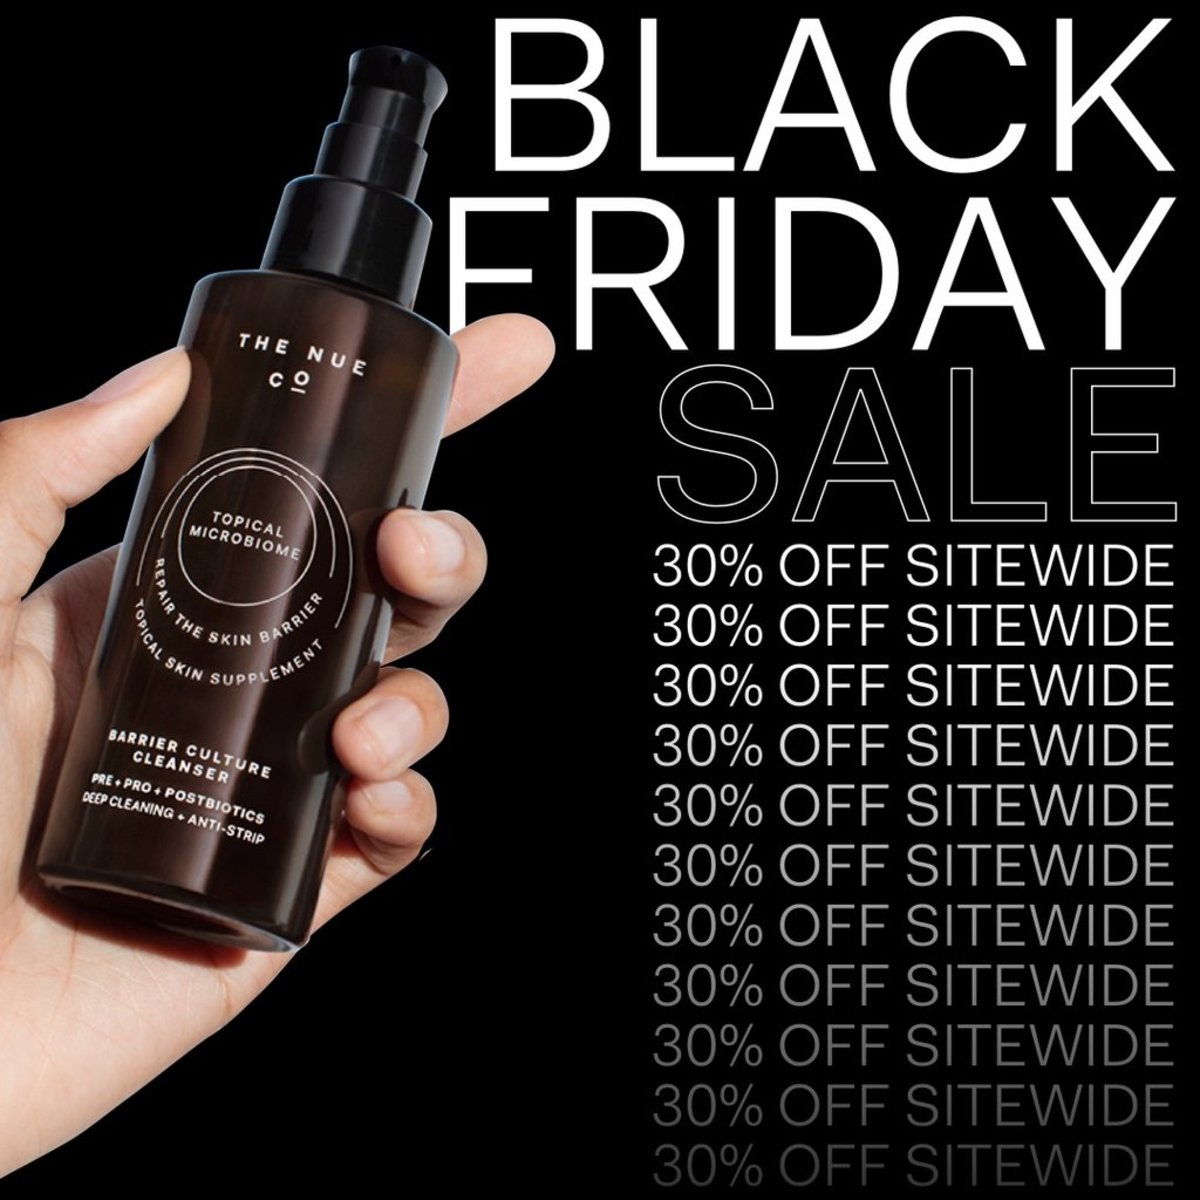 The Nue Co. Black Friday Sale.